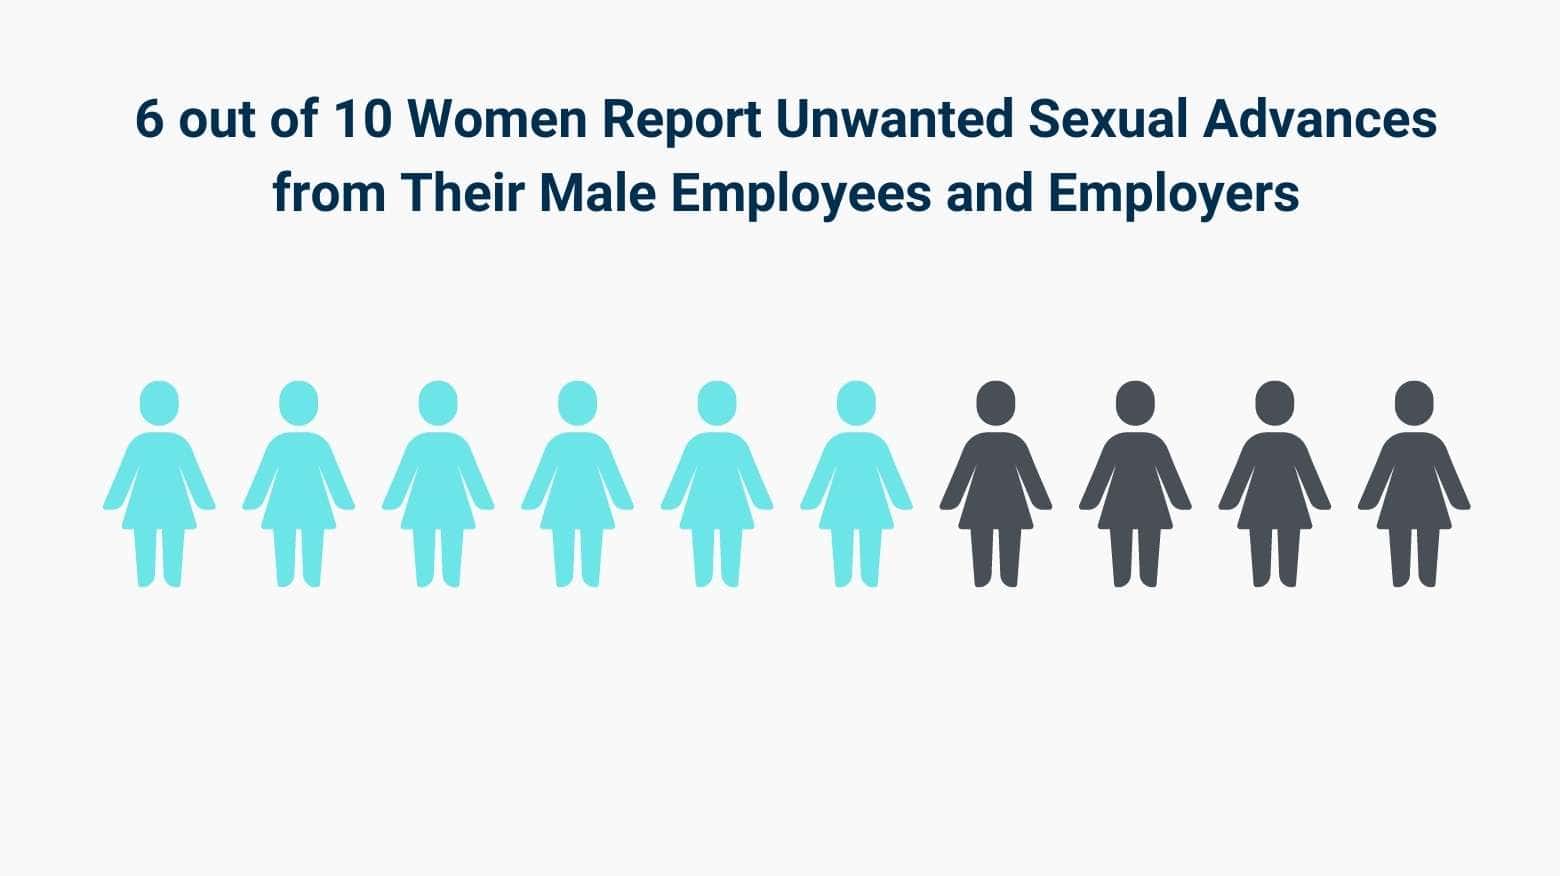 Six out of ten women report unwanted sexual advances from employees and employers